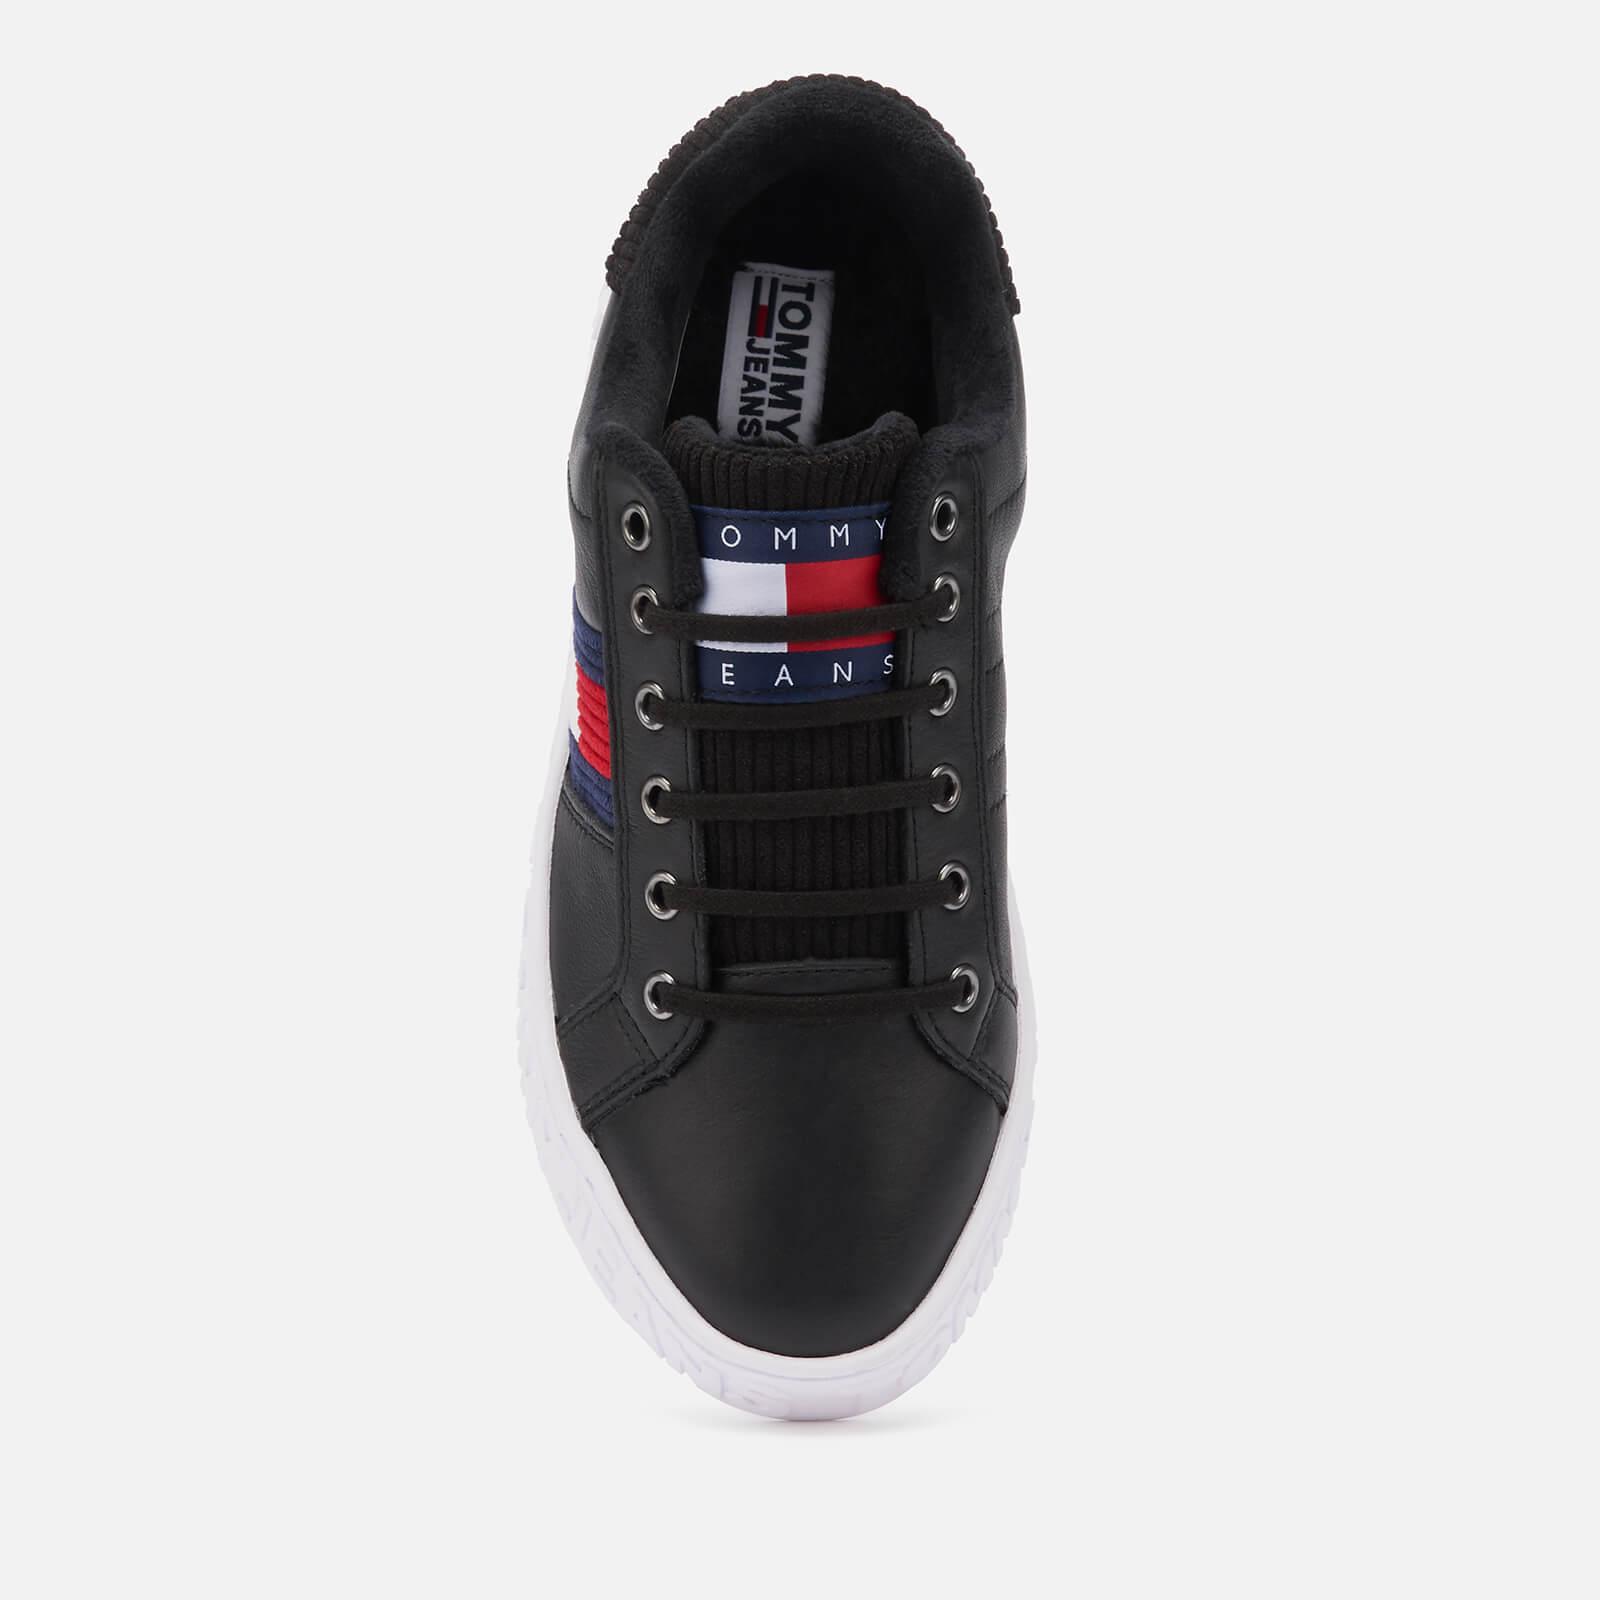 tommy jeans cool warm lined trainers